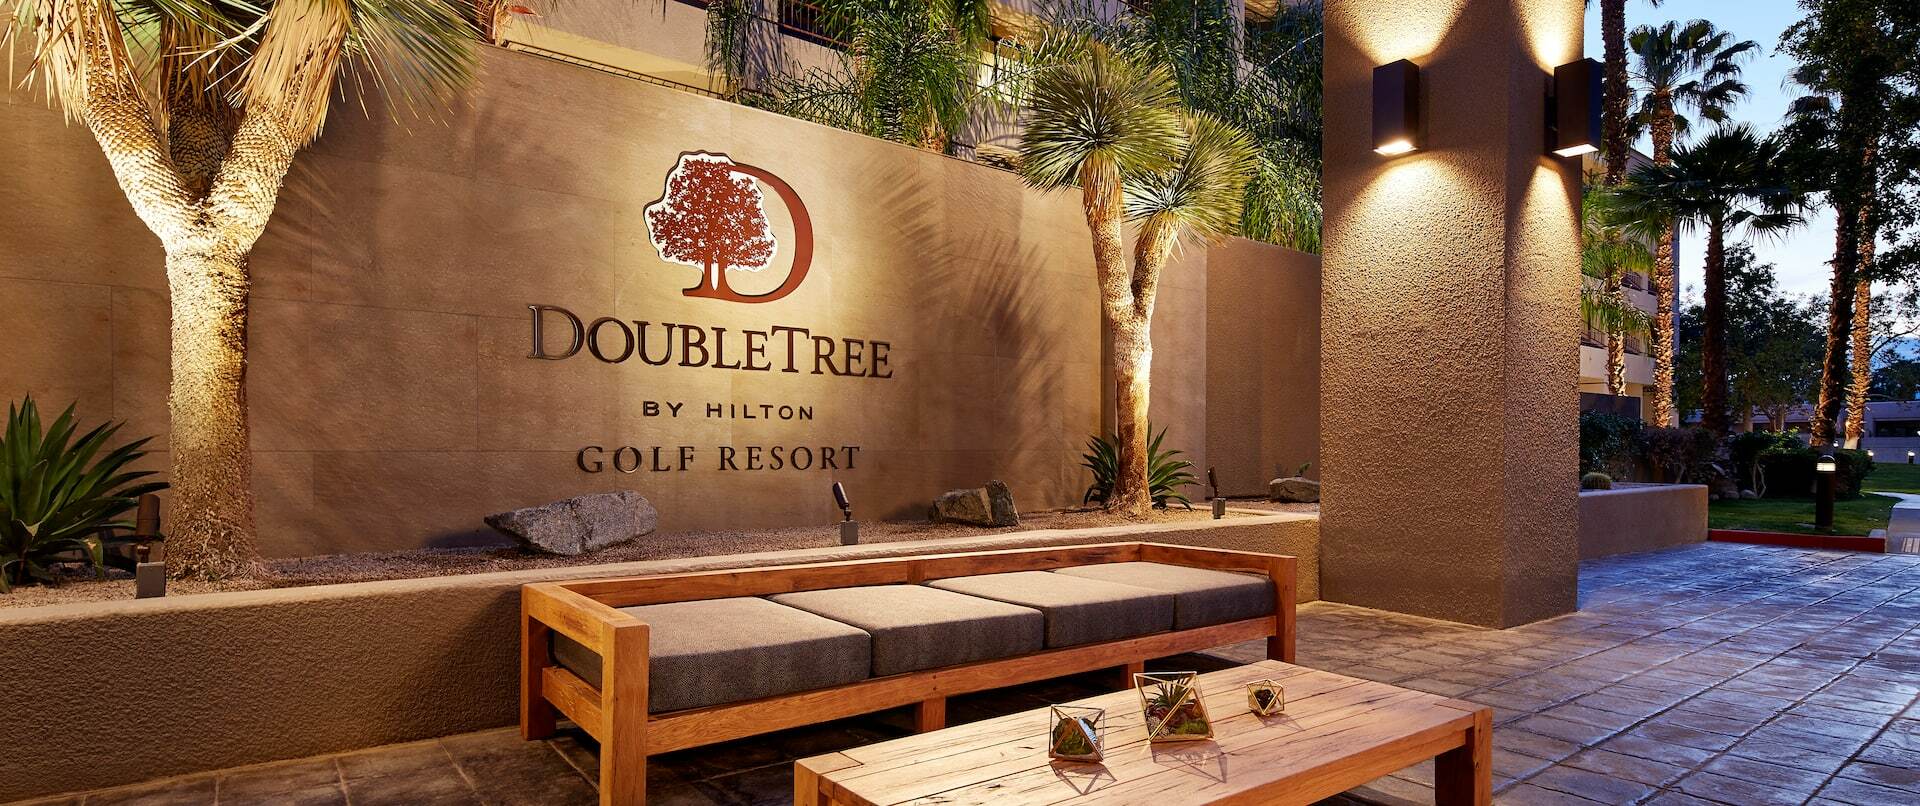 Photo of DoubleTree by Hilton Golf Resort Palm Springs, Cathedral City, CA